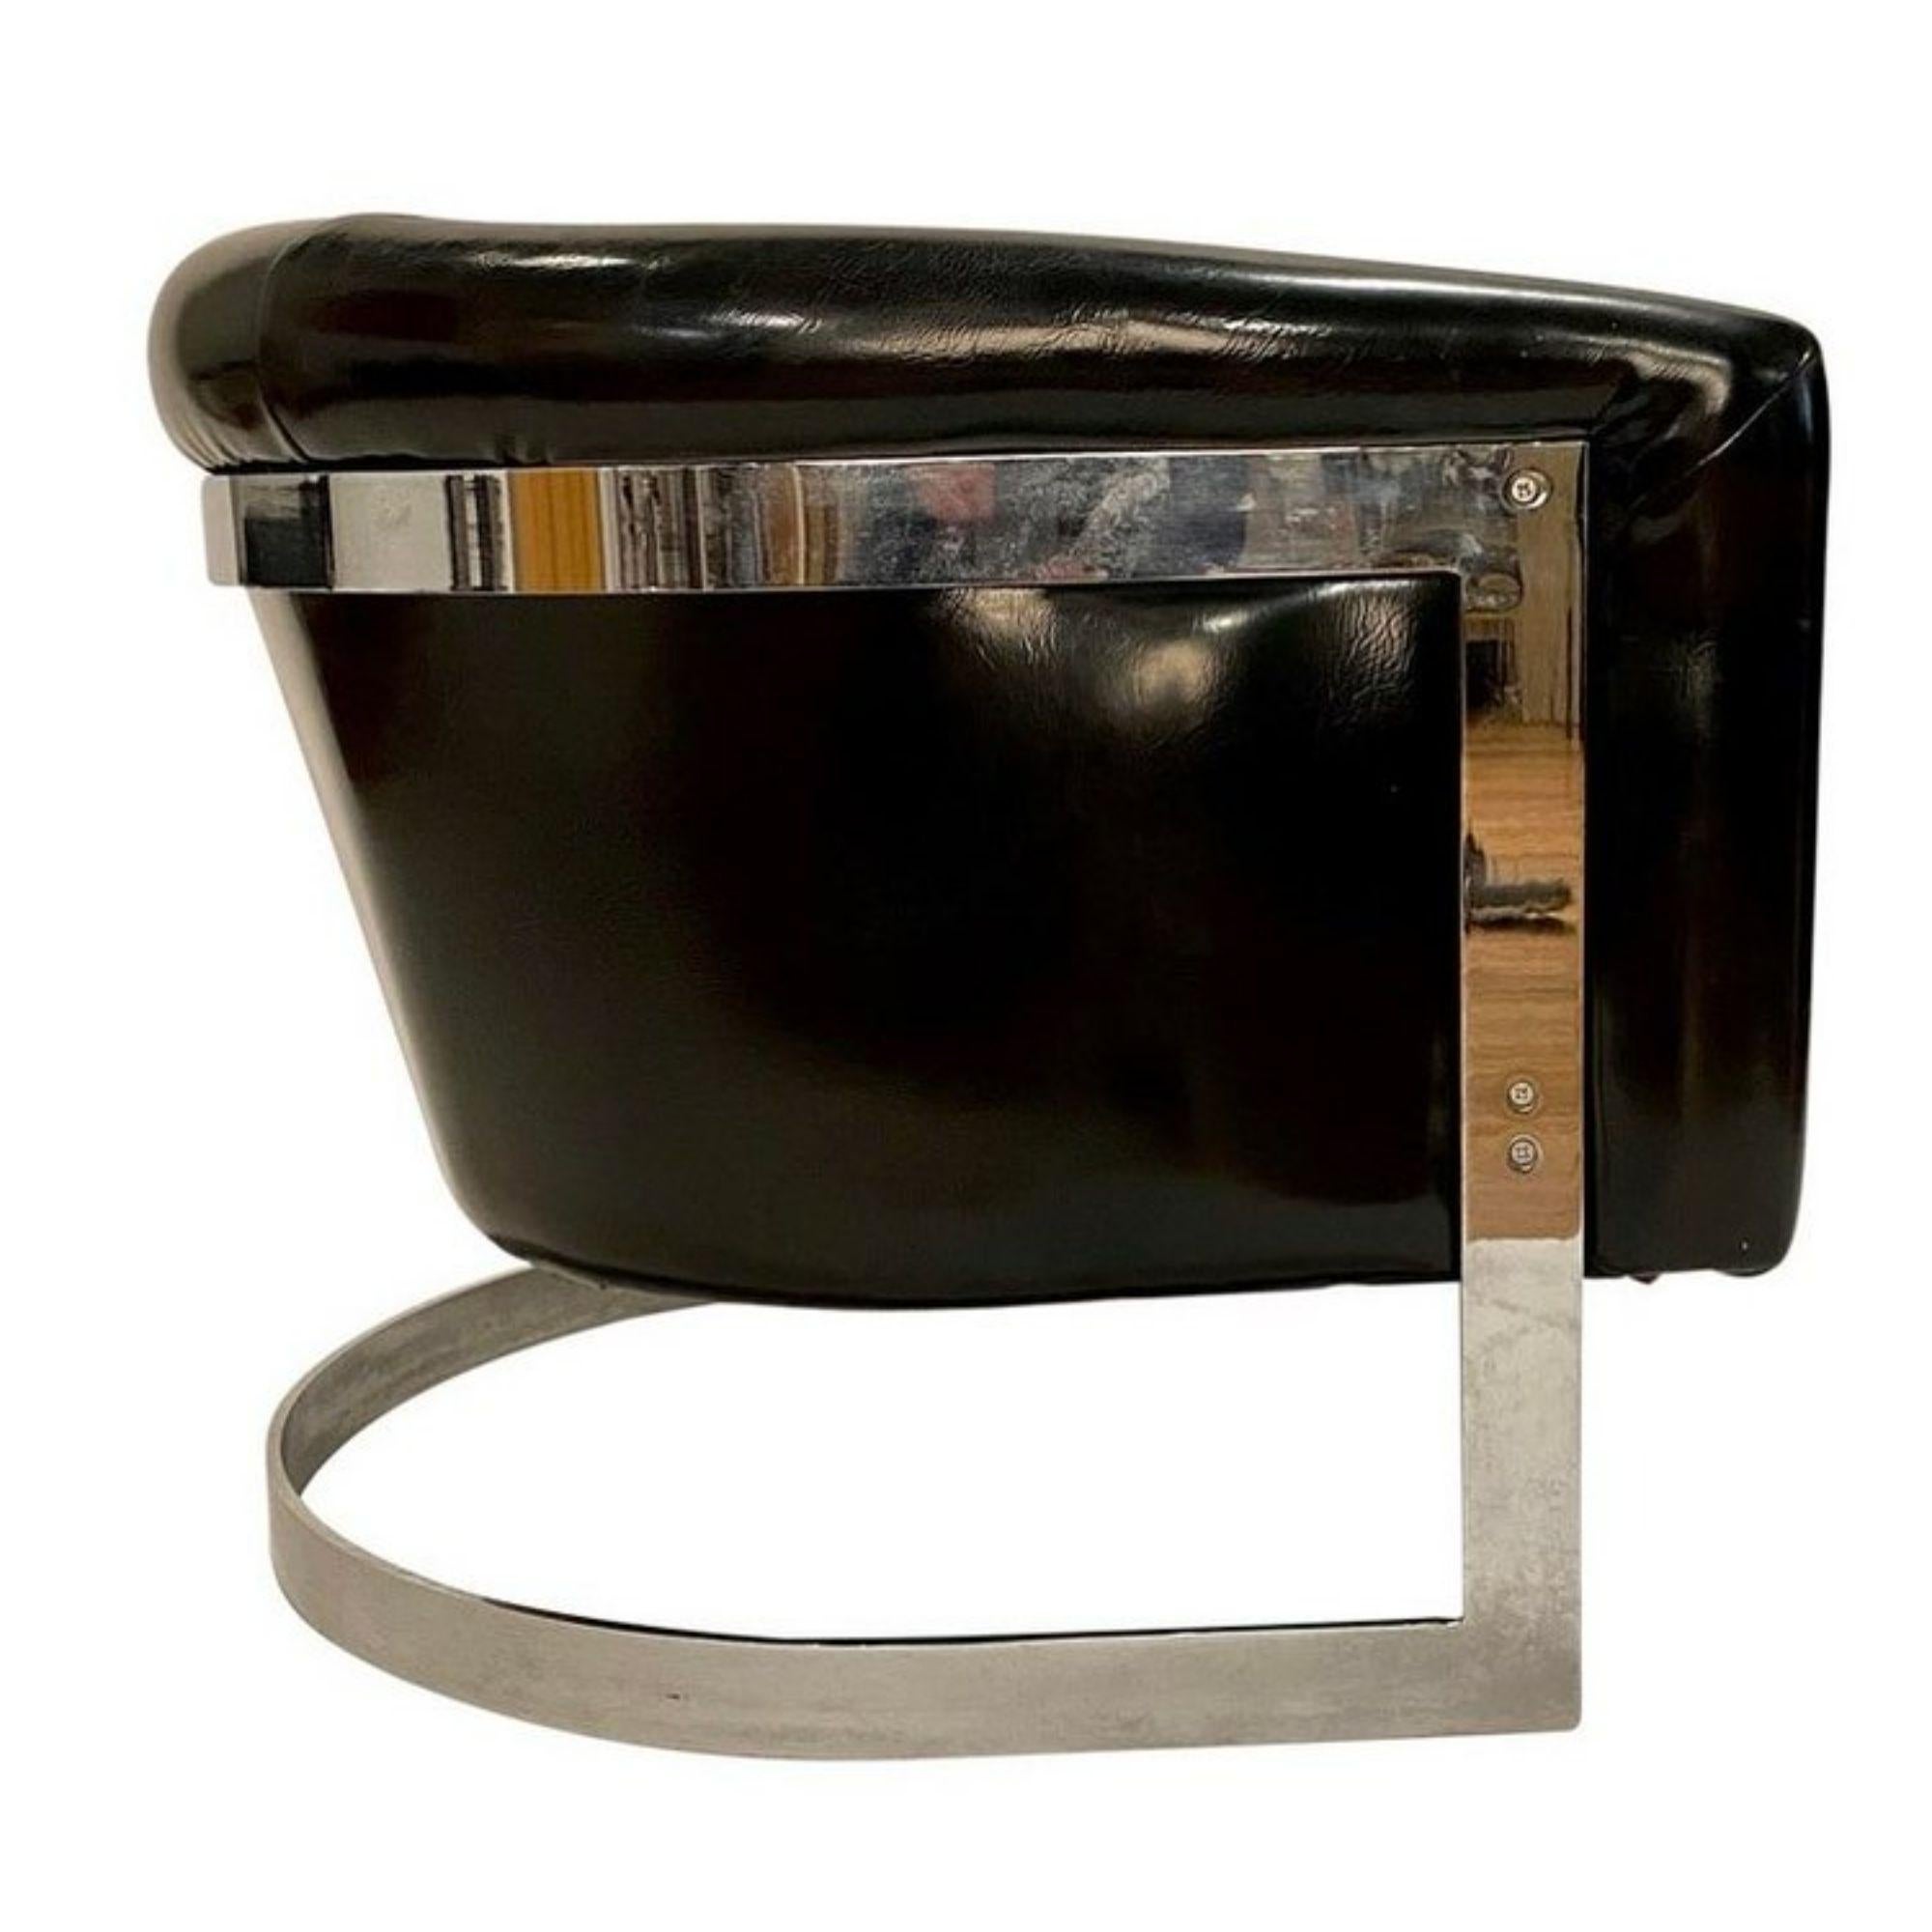 Mid-Century Modern Milo Baughman style tub or barrel chair on a polished chrome steel frame in vintage patent black vinyl upholstery. See our listings for similar chairs and sofa in this style.

Additional Information:
Materials: vinyl, polished